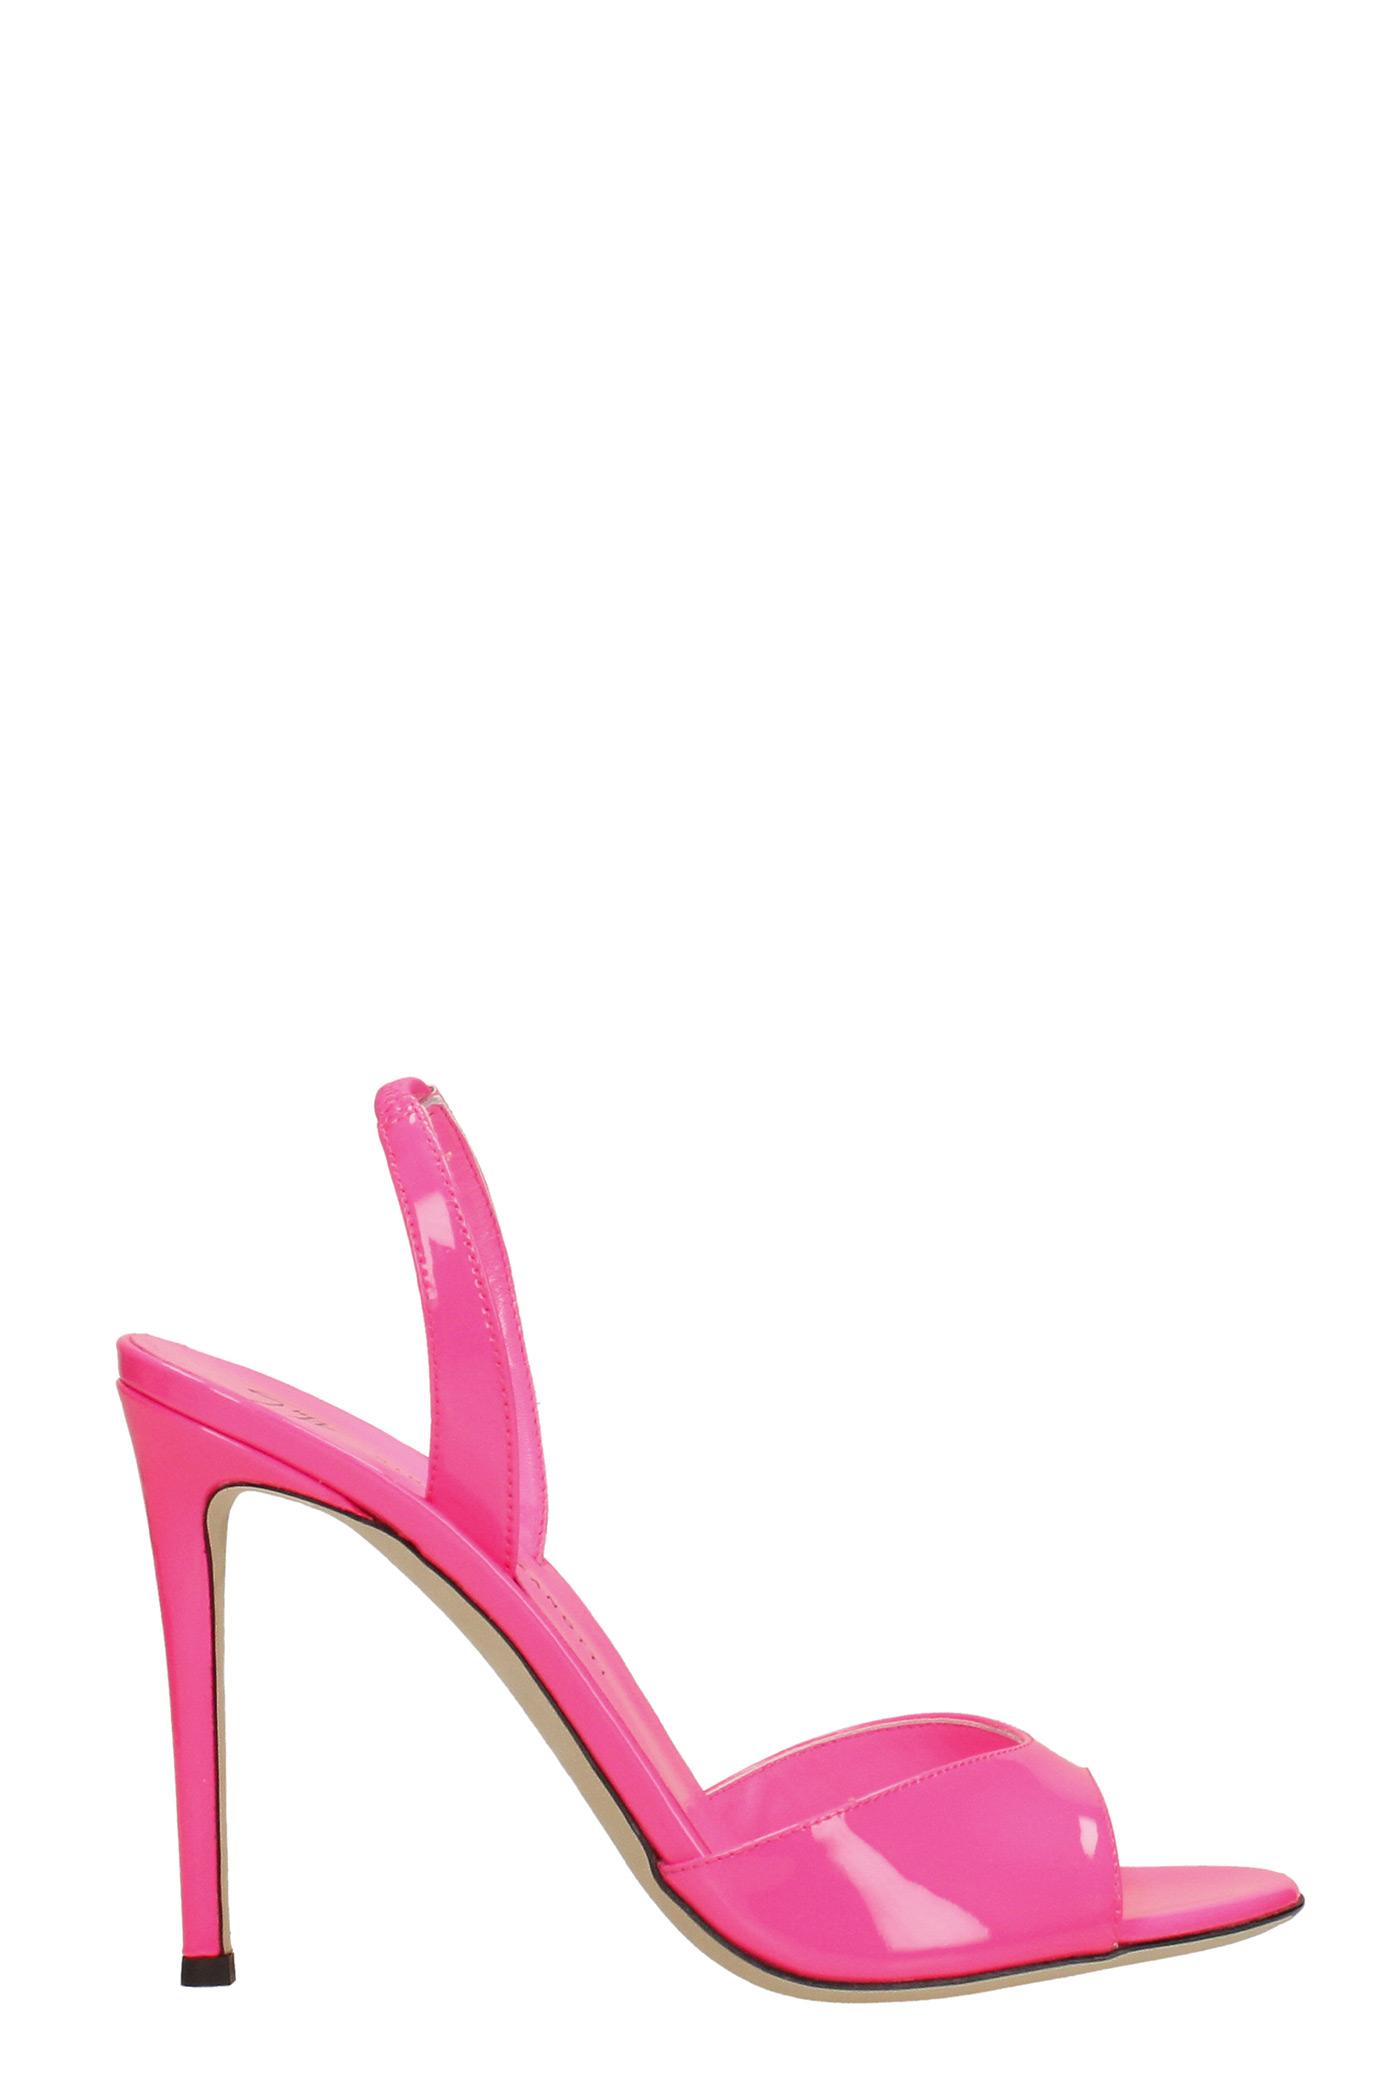 Giuseppe Zanotti Libeth Sandals In Patent Leather in Pink | Lyst